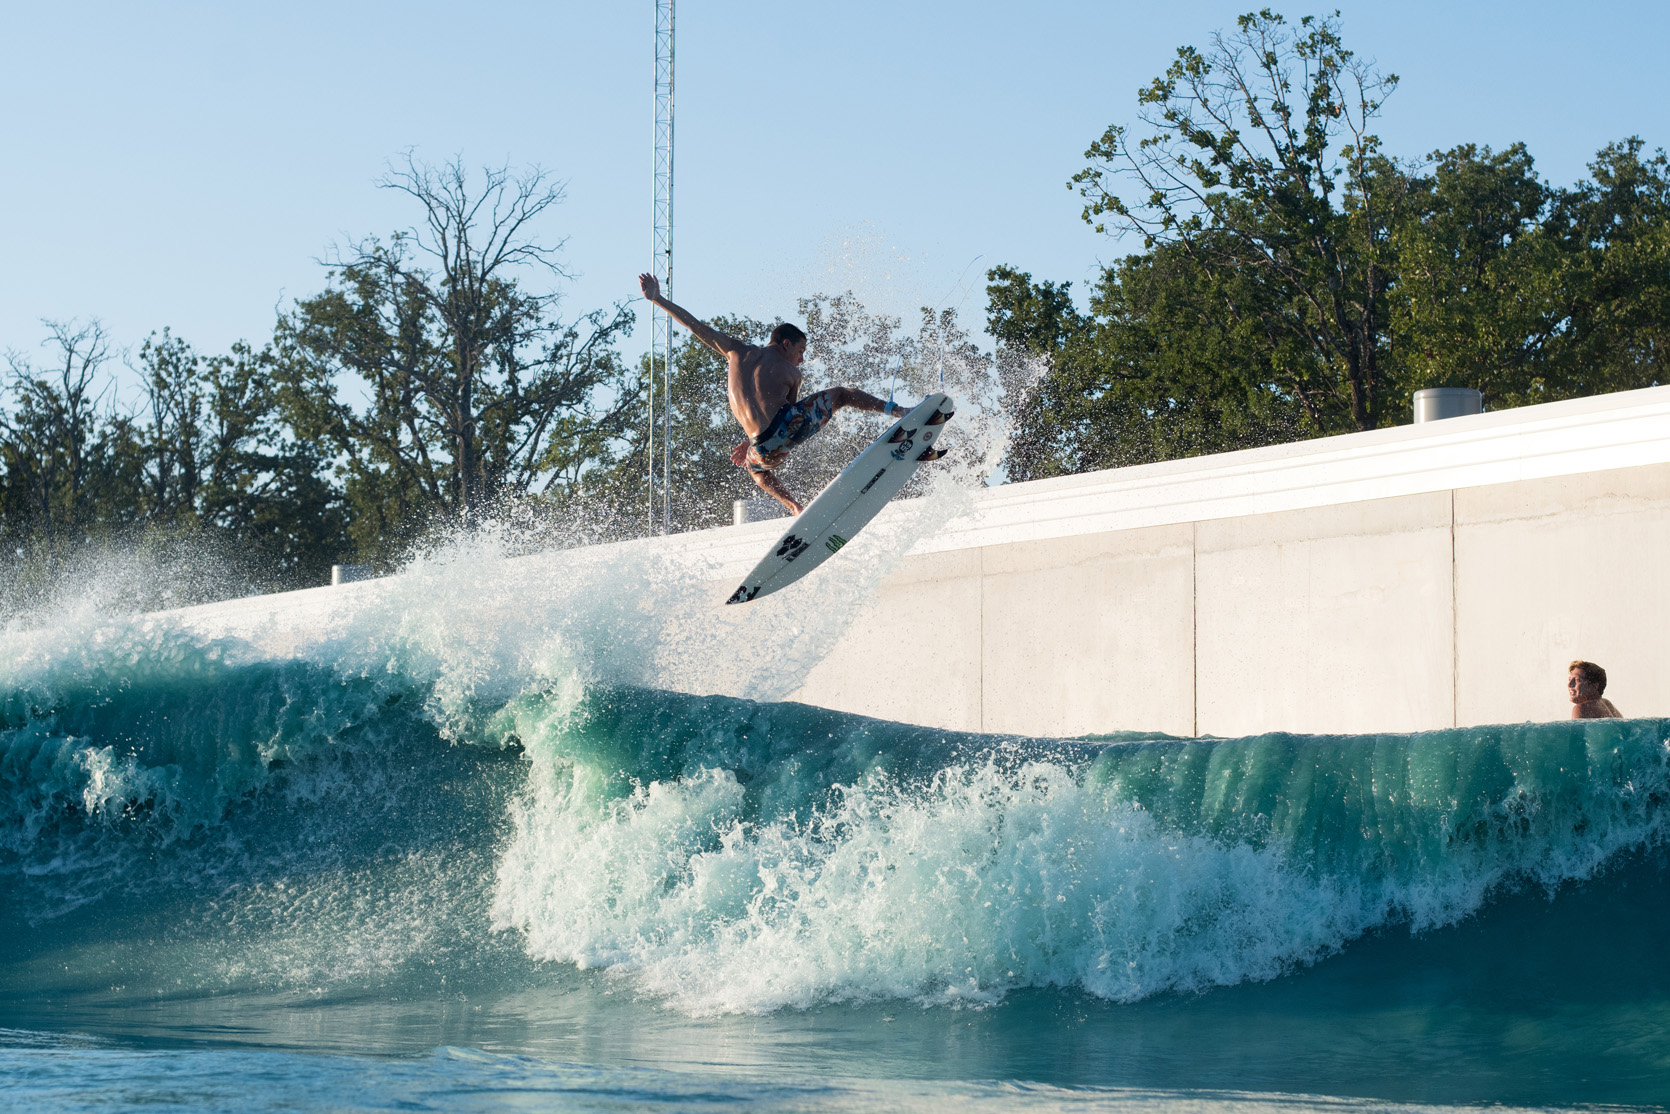 Monster Energy's Eithan Osborne Will Be Competing at the Stab High Surf Event in Waco, Texas